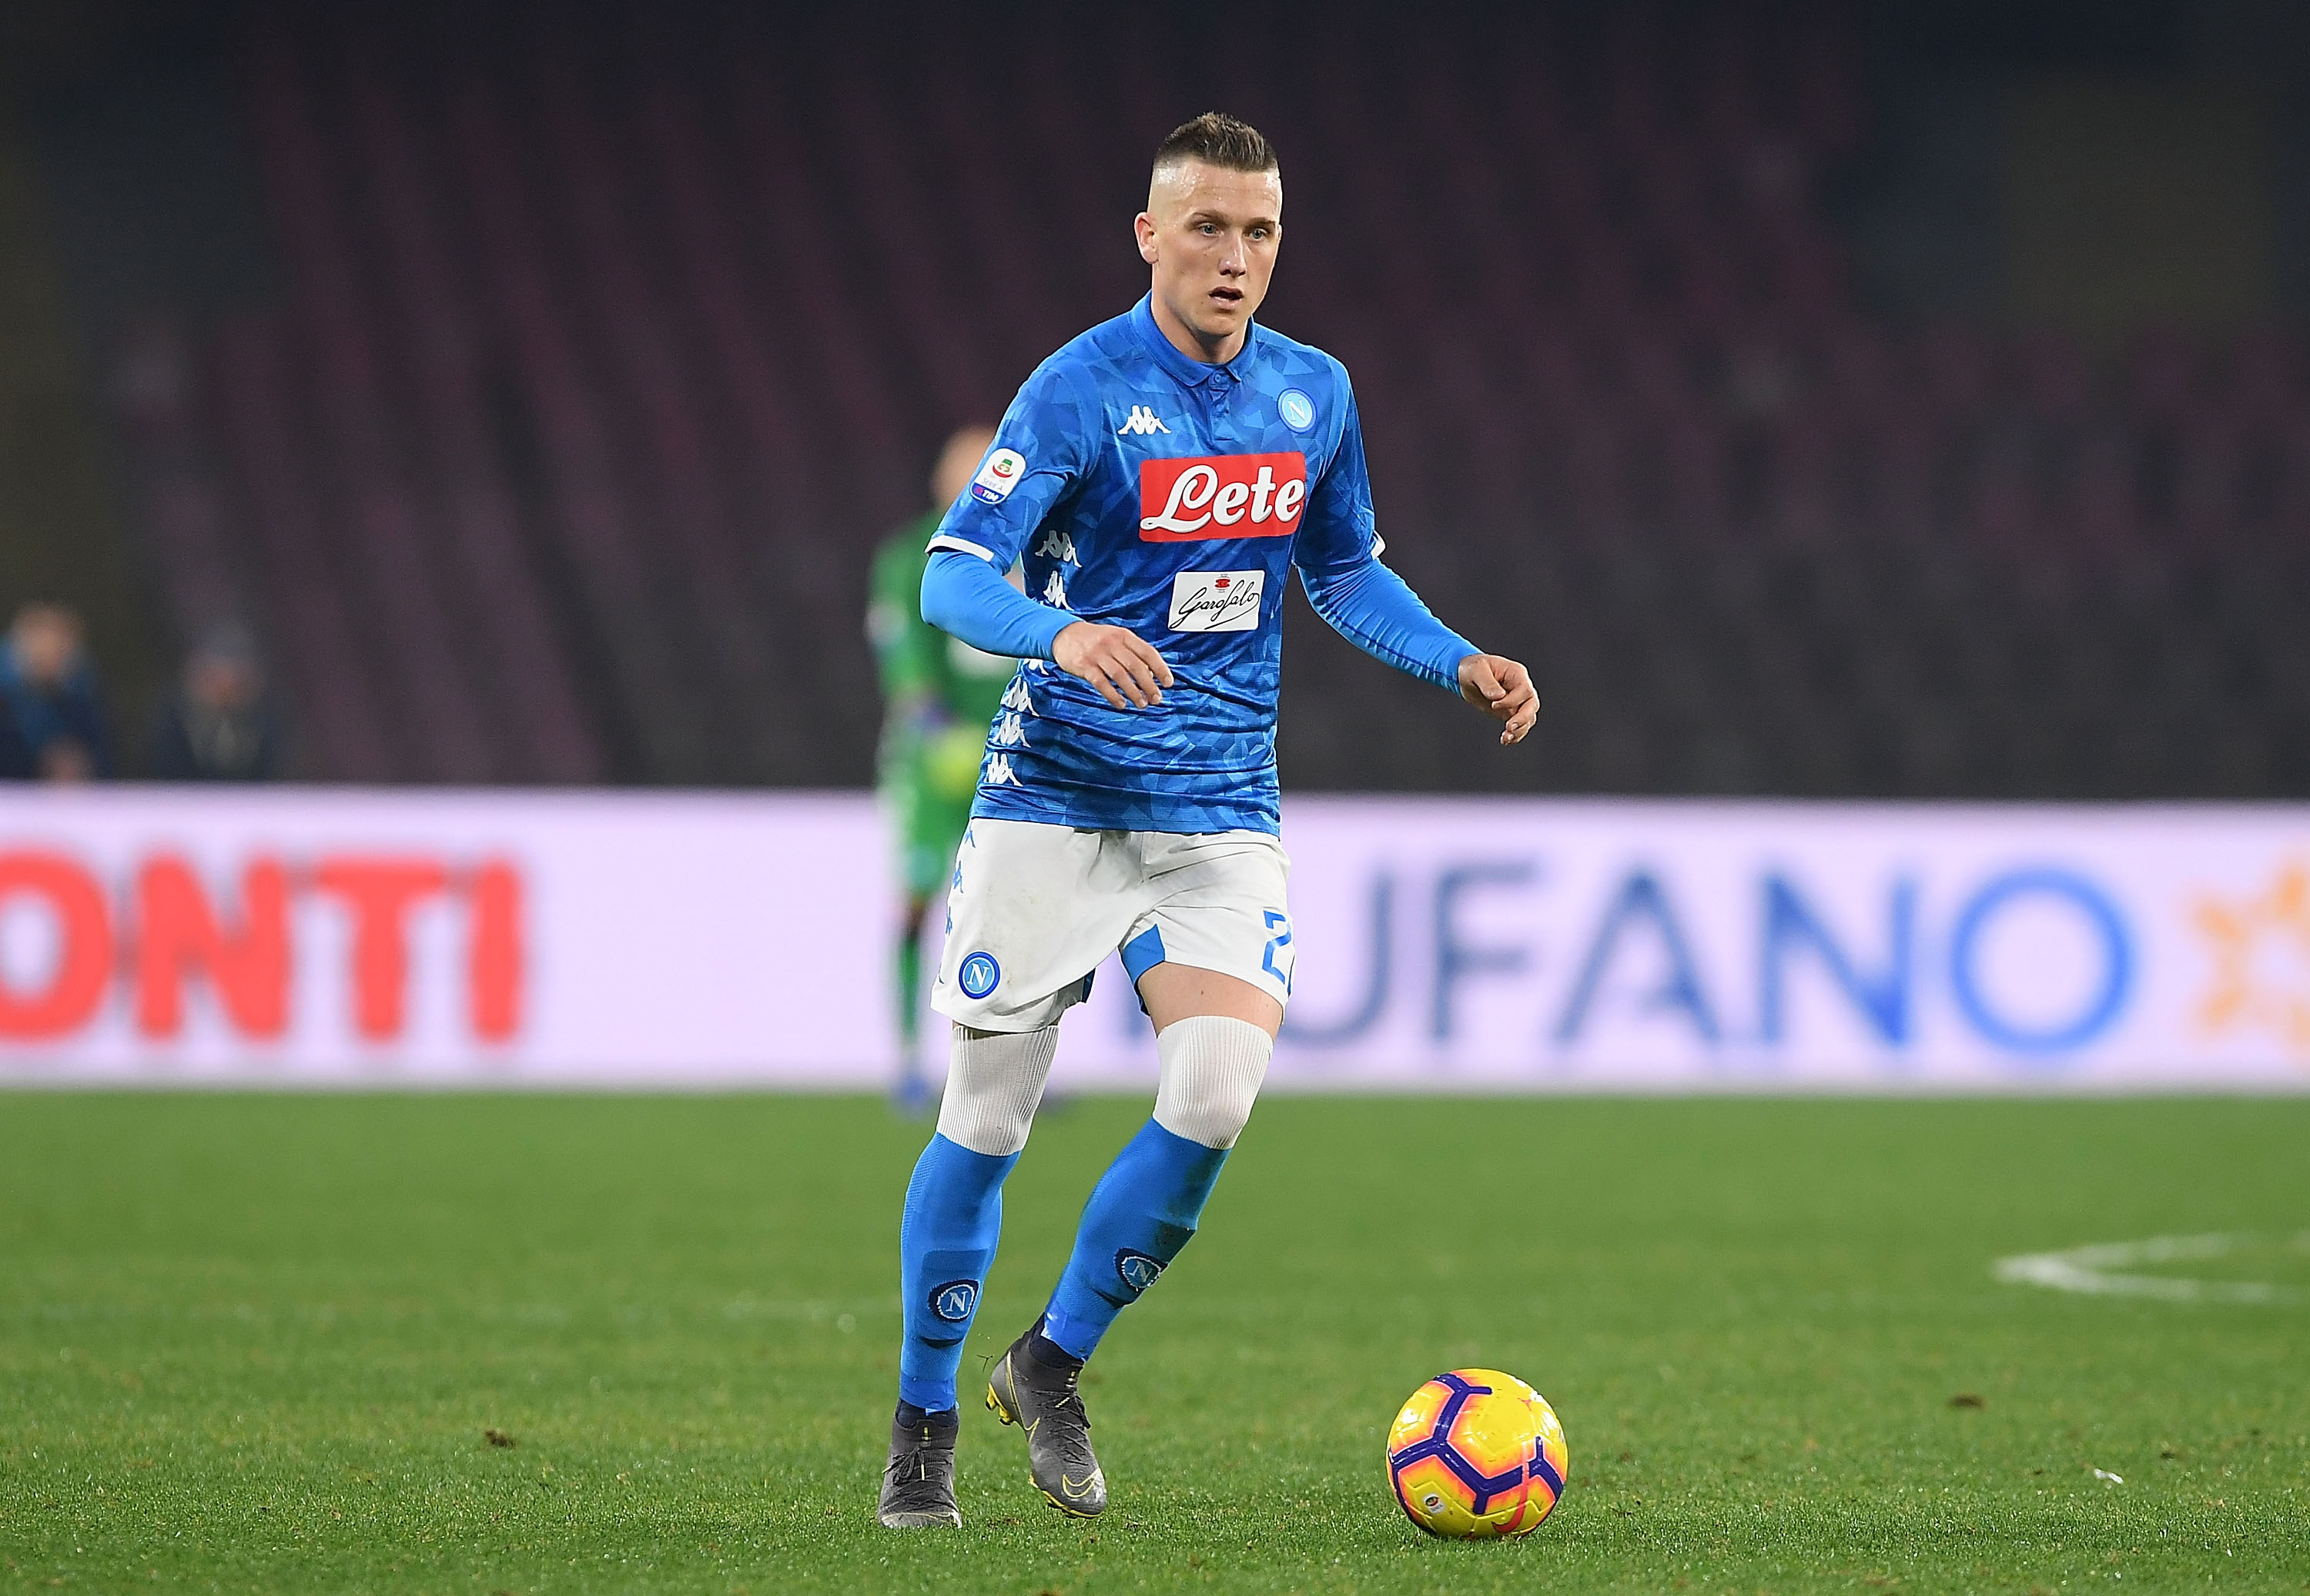 Zielinski on the radars of Liverpool and Manchester United (Photo by Francesco Pecoraro/Getty Images)